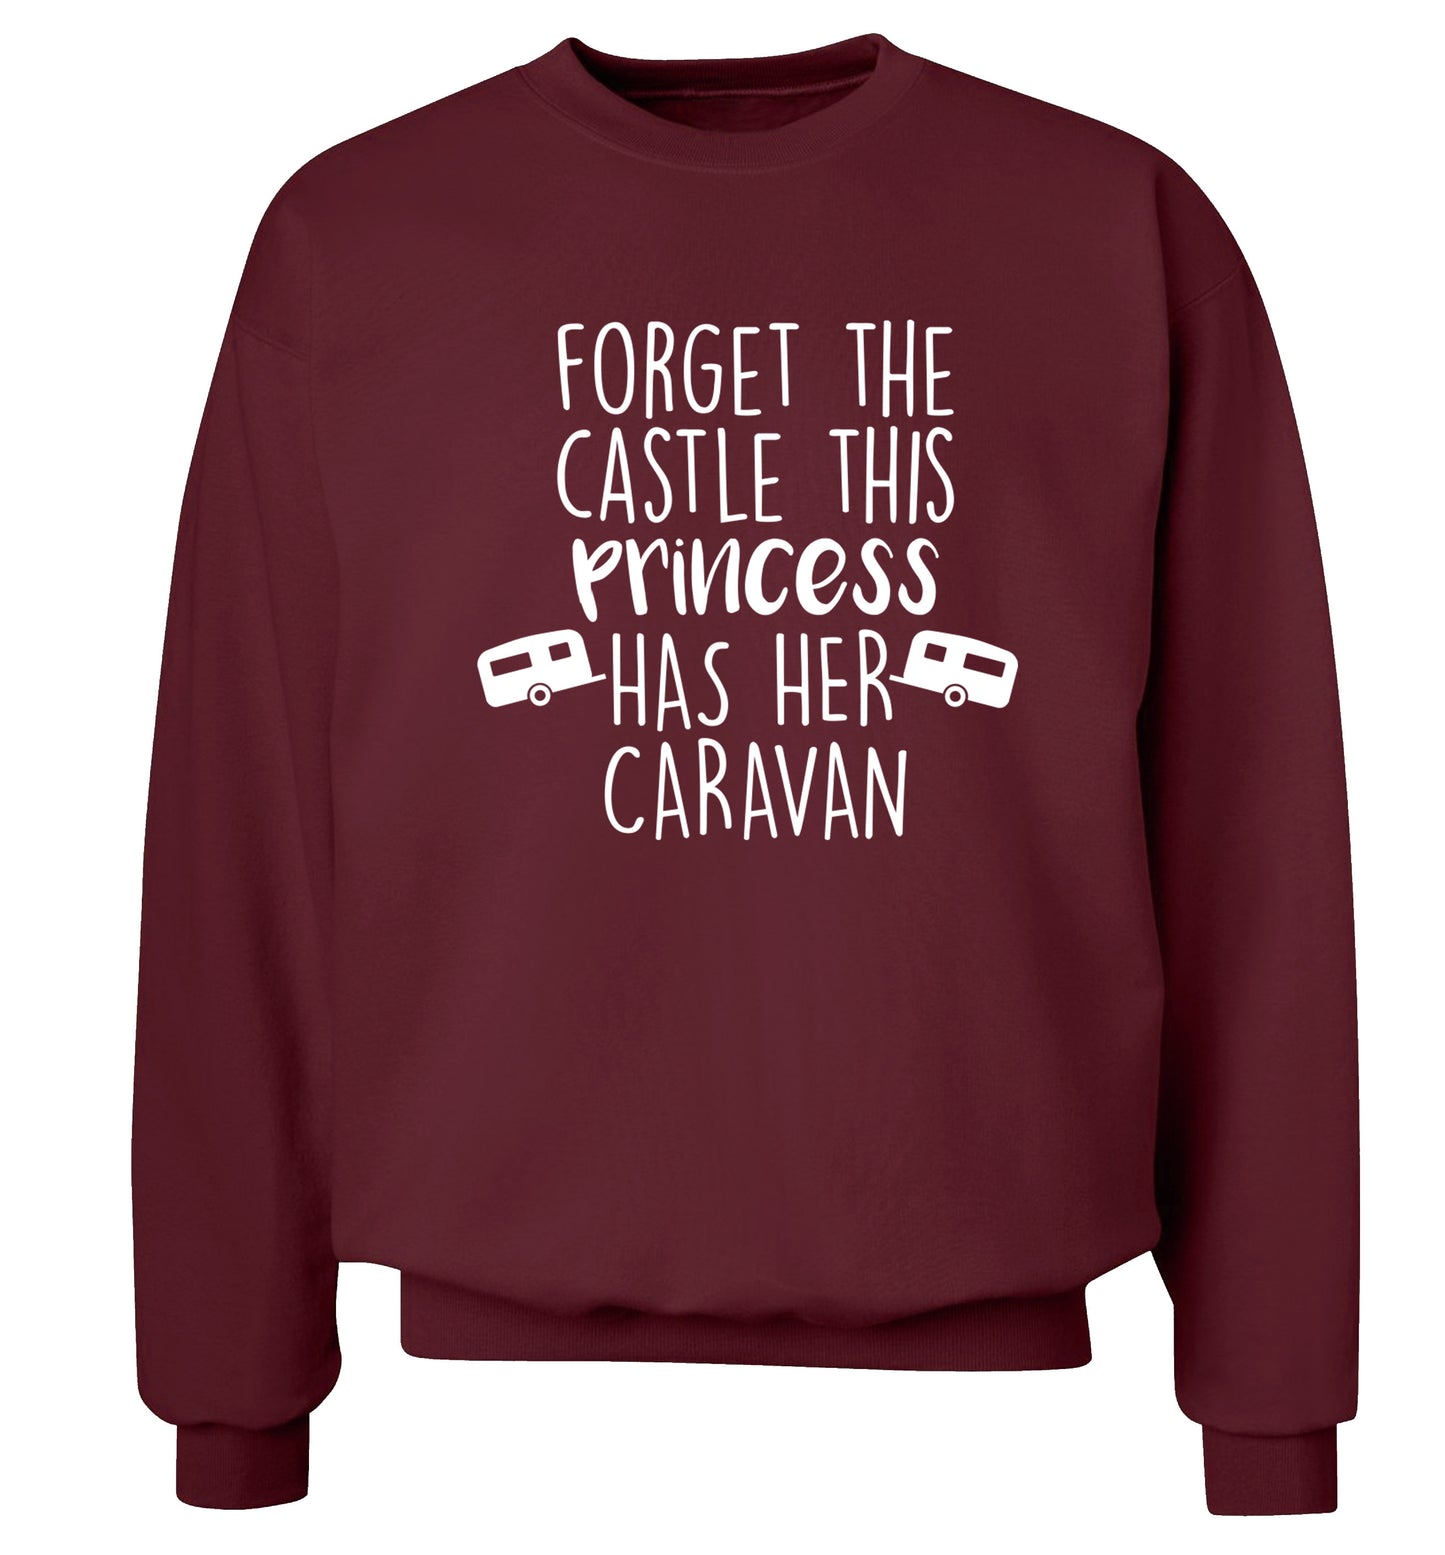 Forget the castle this princess lives at the caravan Adult's unisex maroon Sweater 2XL